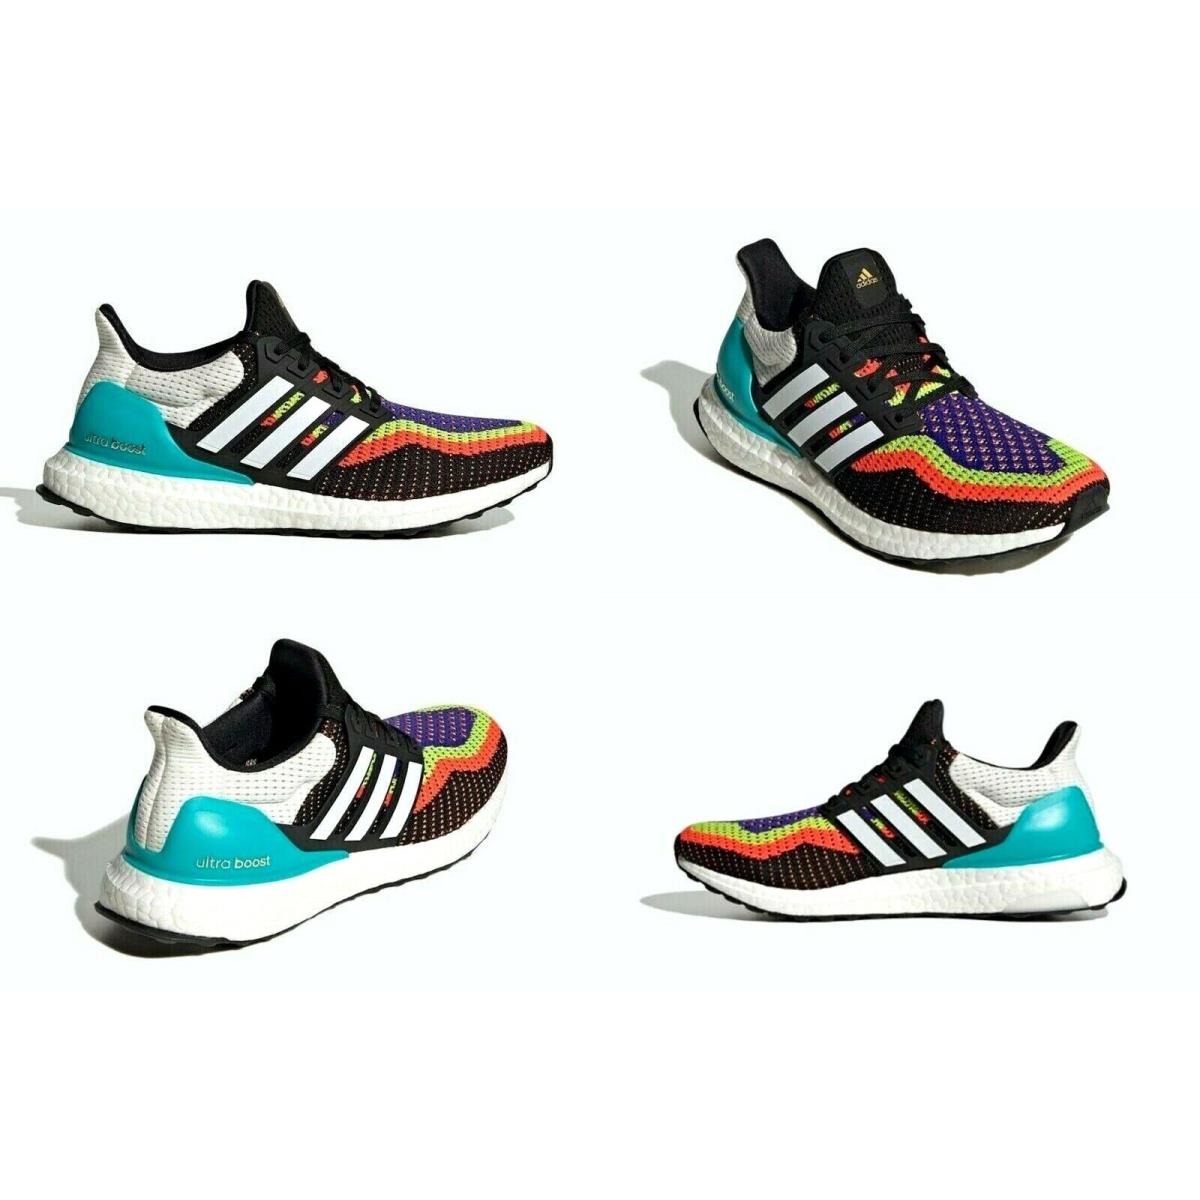 Adidas Ultraboost Dna W Multi Color Running Shoes Size 5.5 US Women FW8709